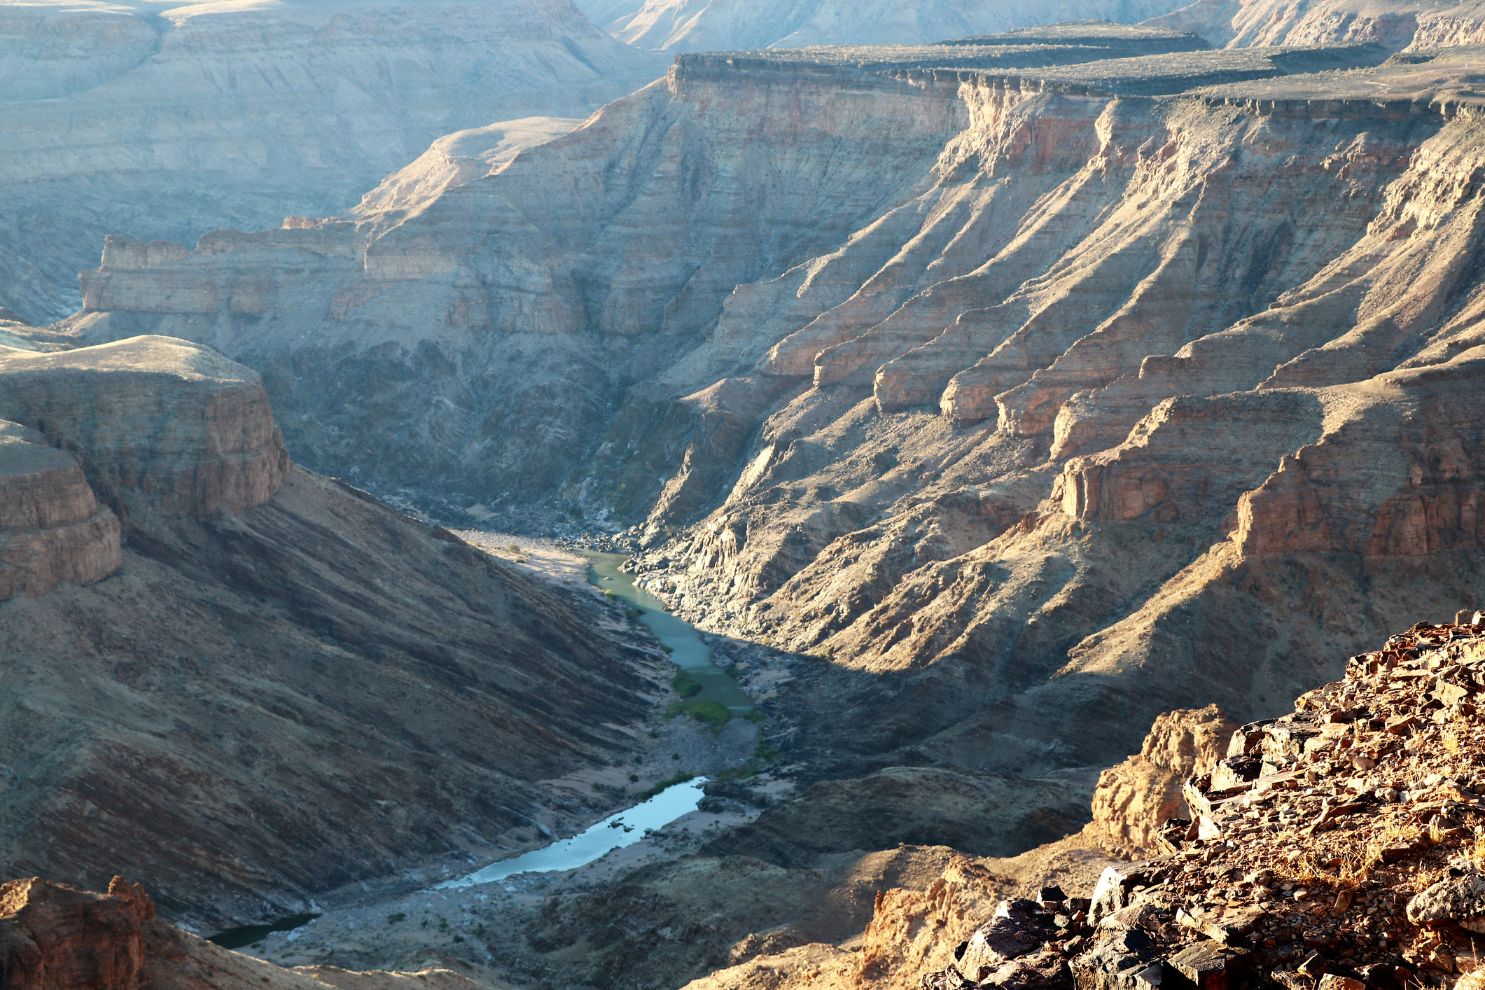 Namibia's Fish River Canyon, the second largest canyon in the world.